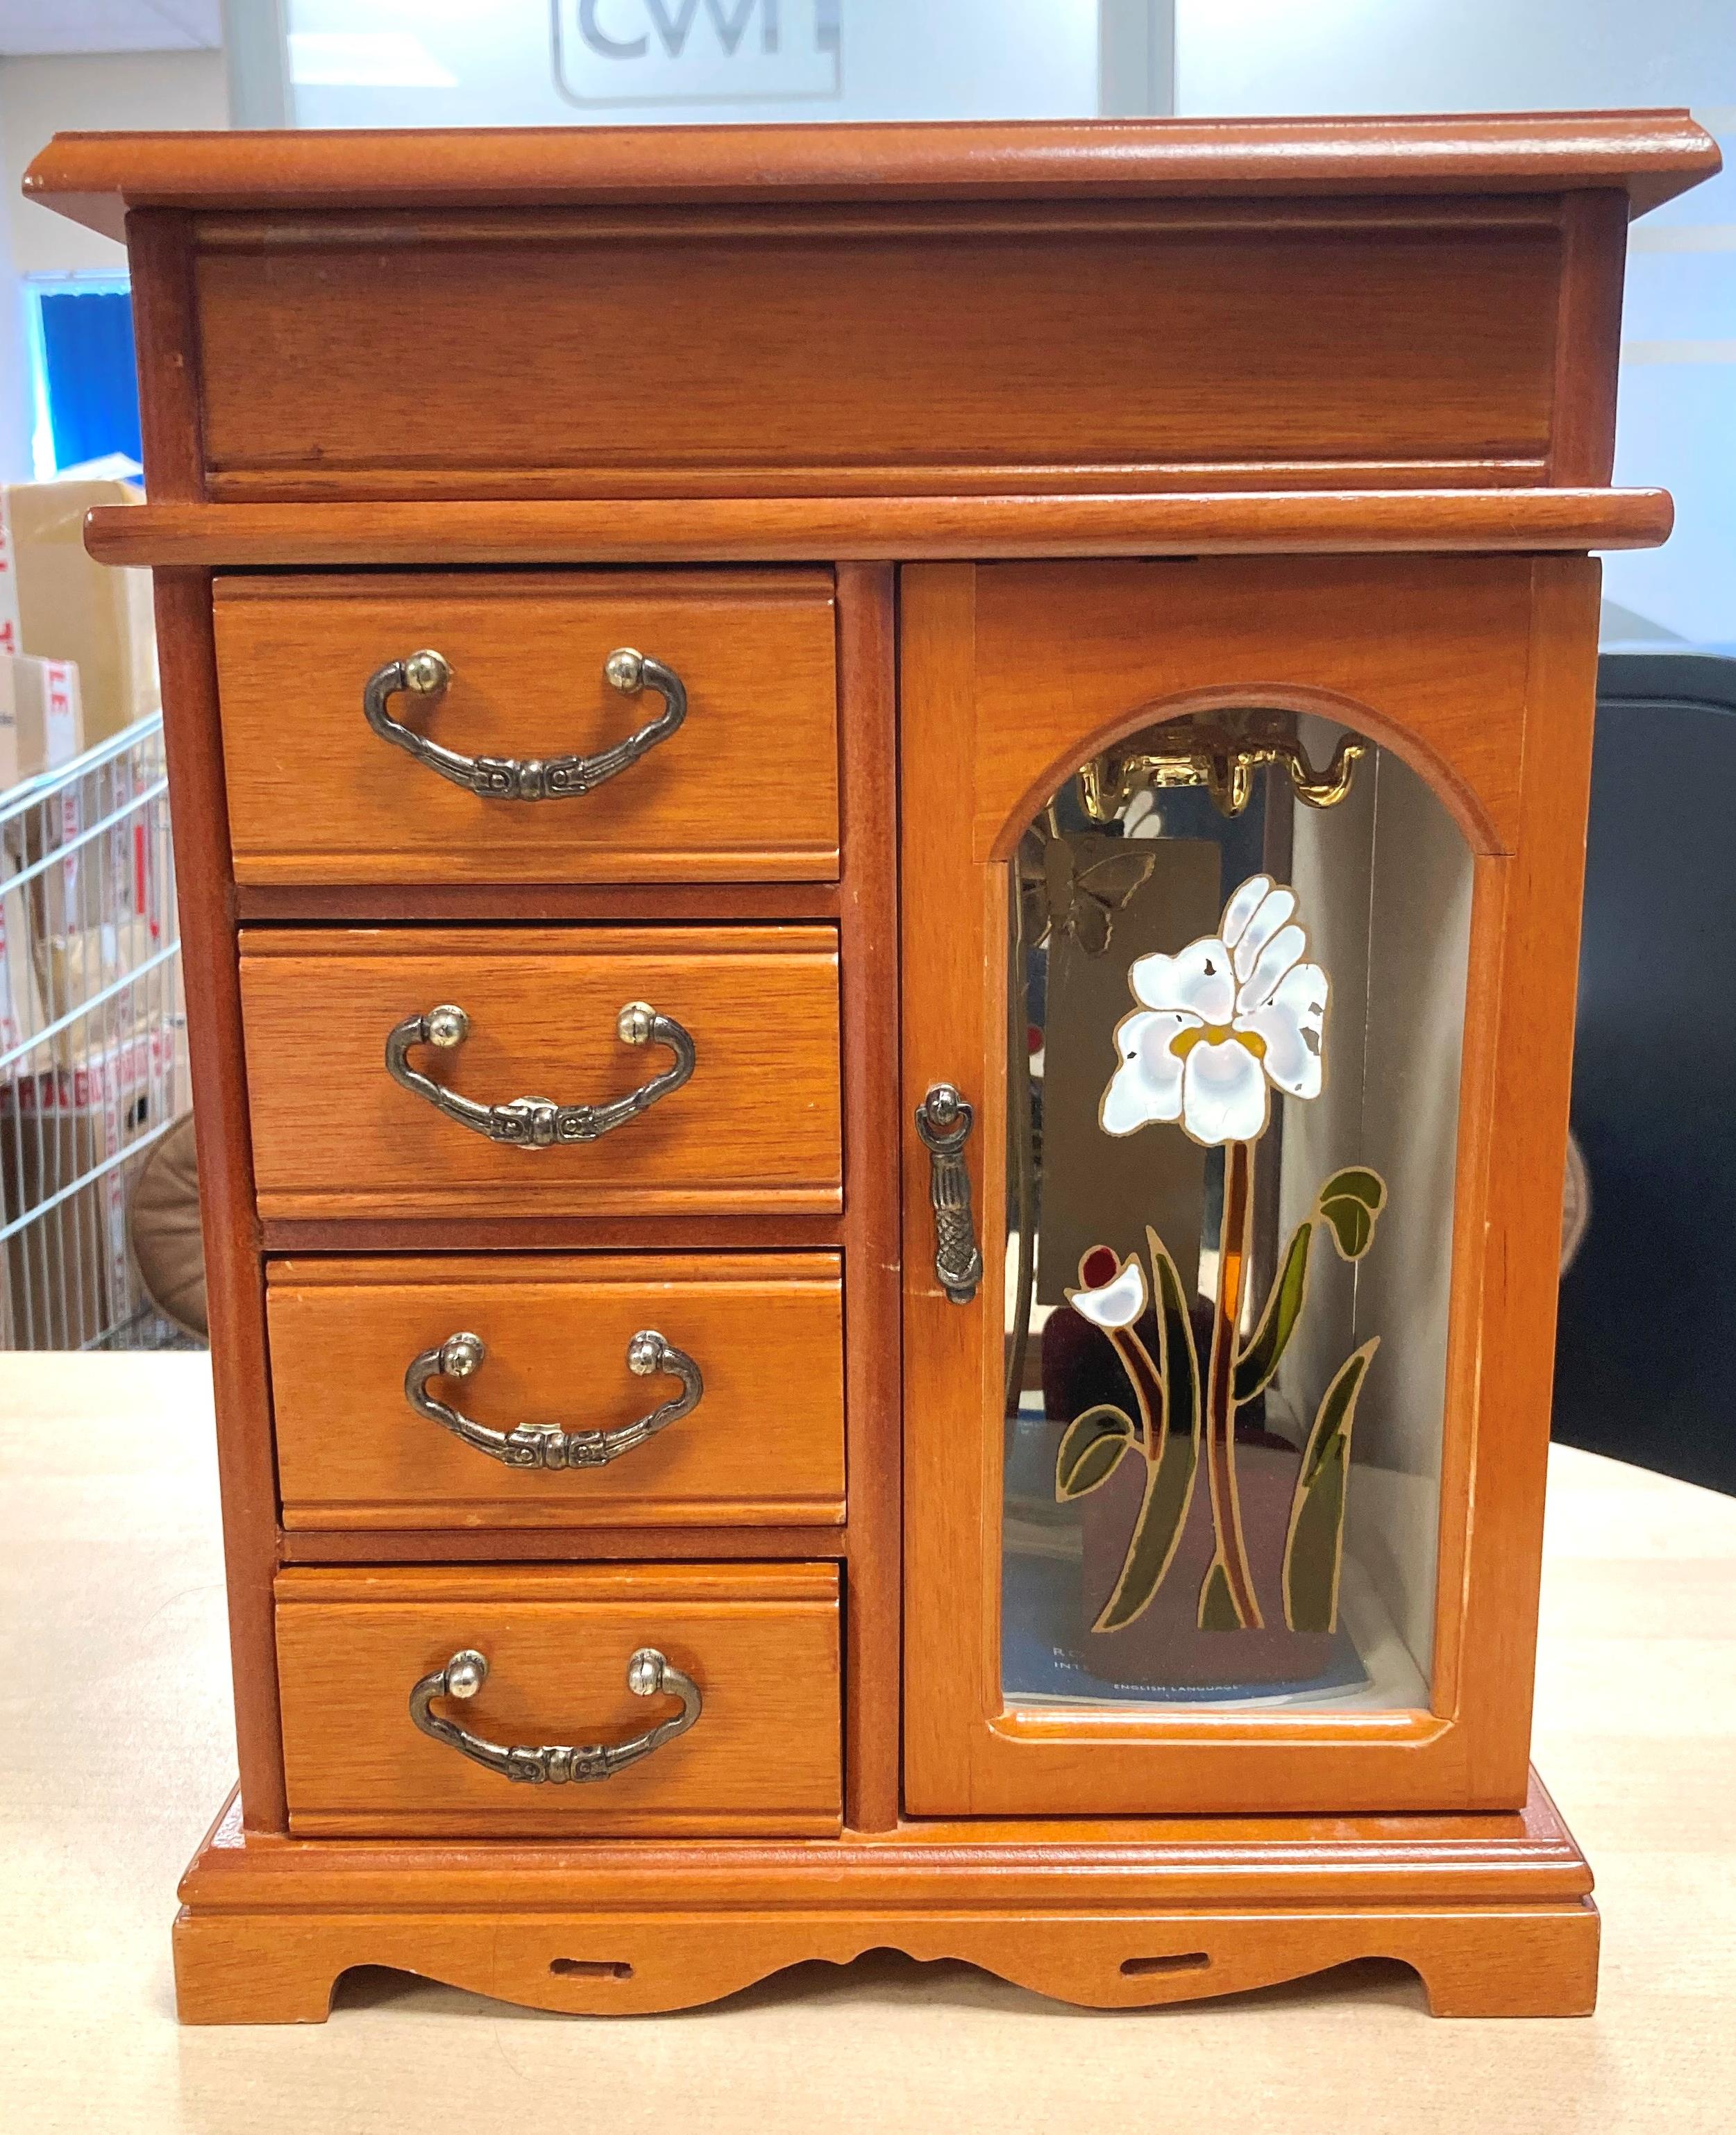 Contents to wooden jewellery box with glass and floral door - a quantity of mixed grade jewellery